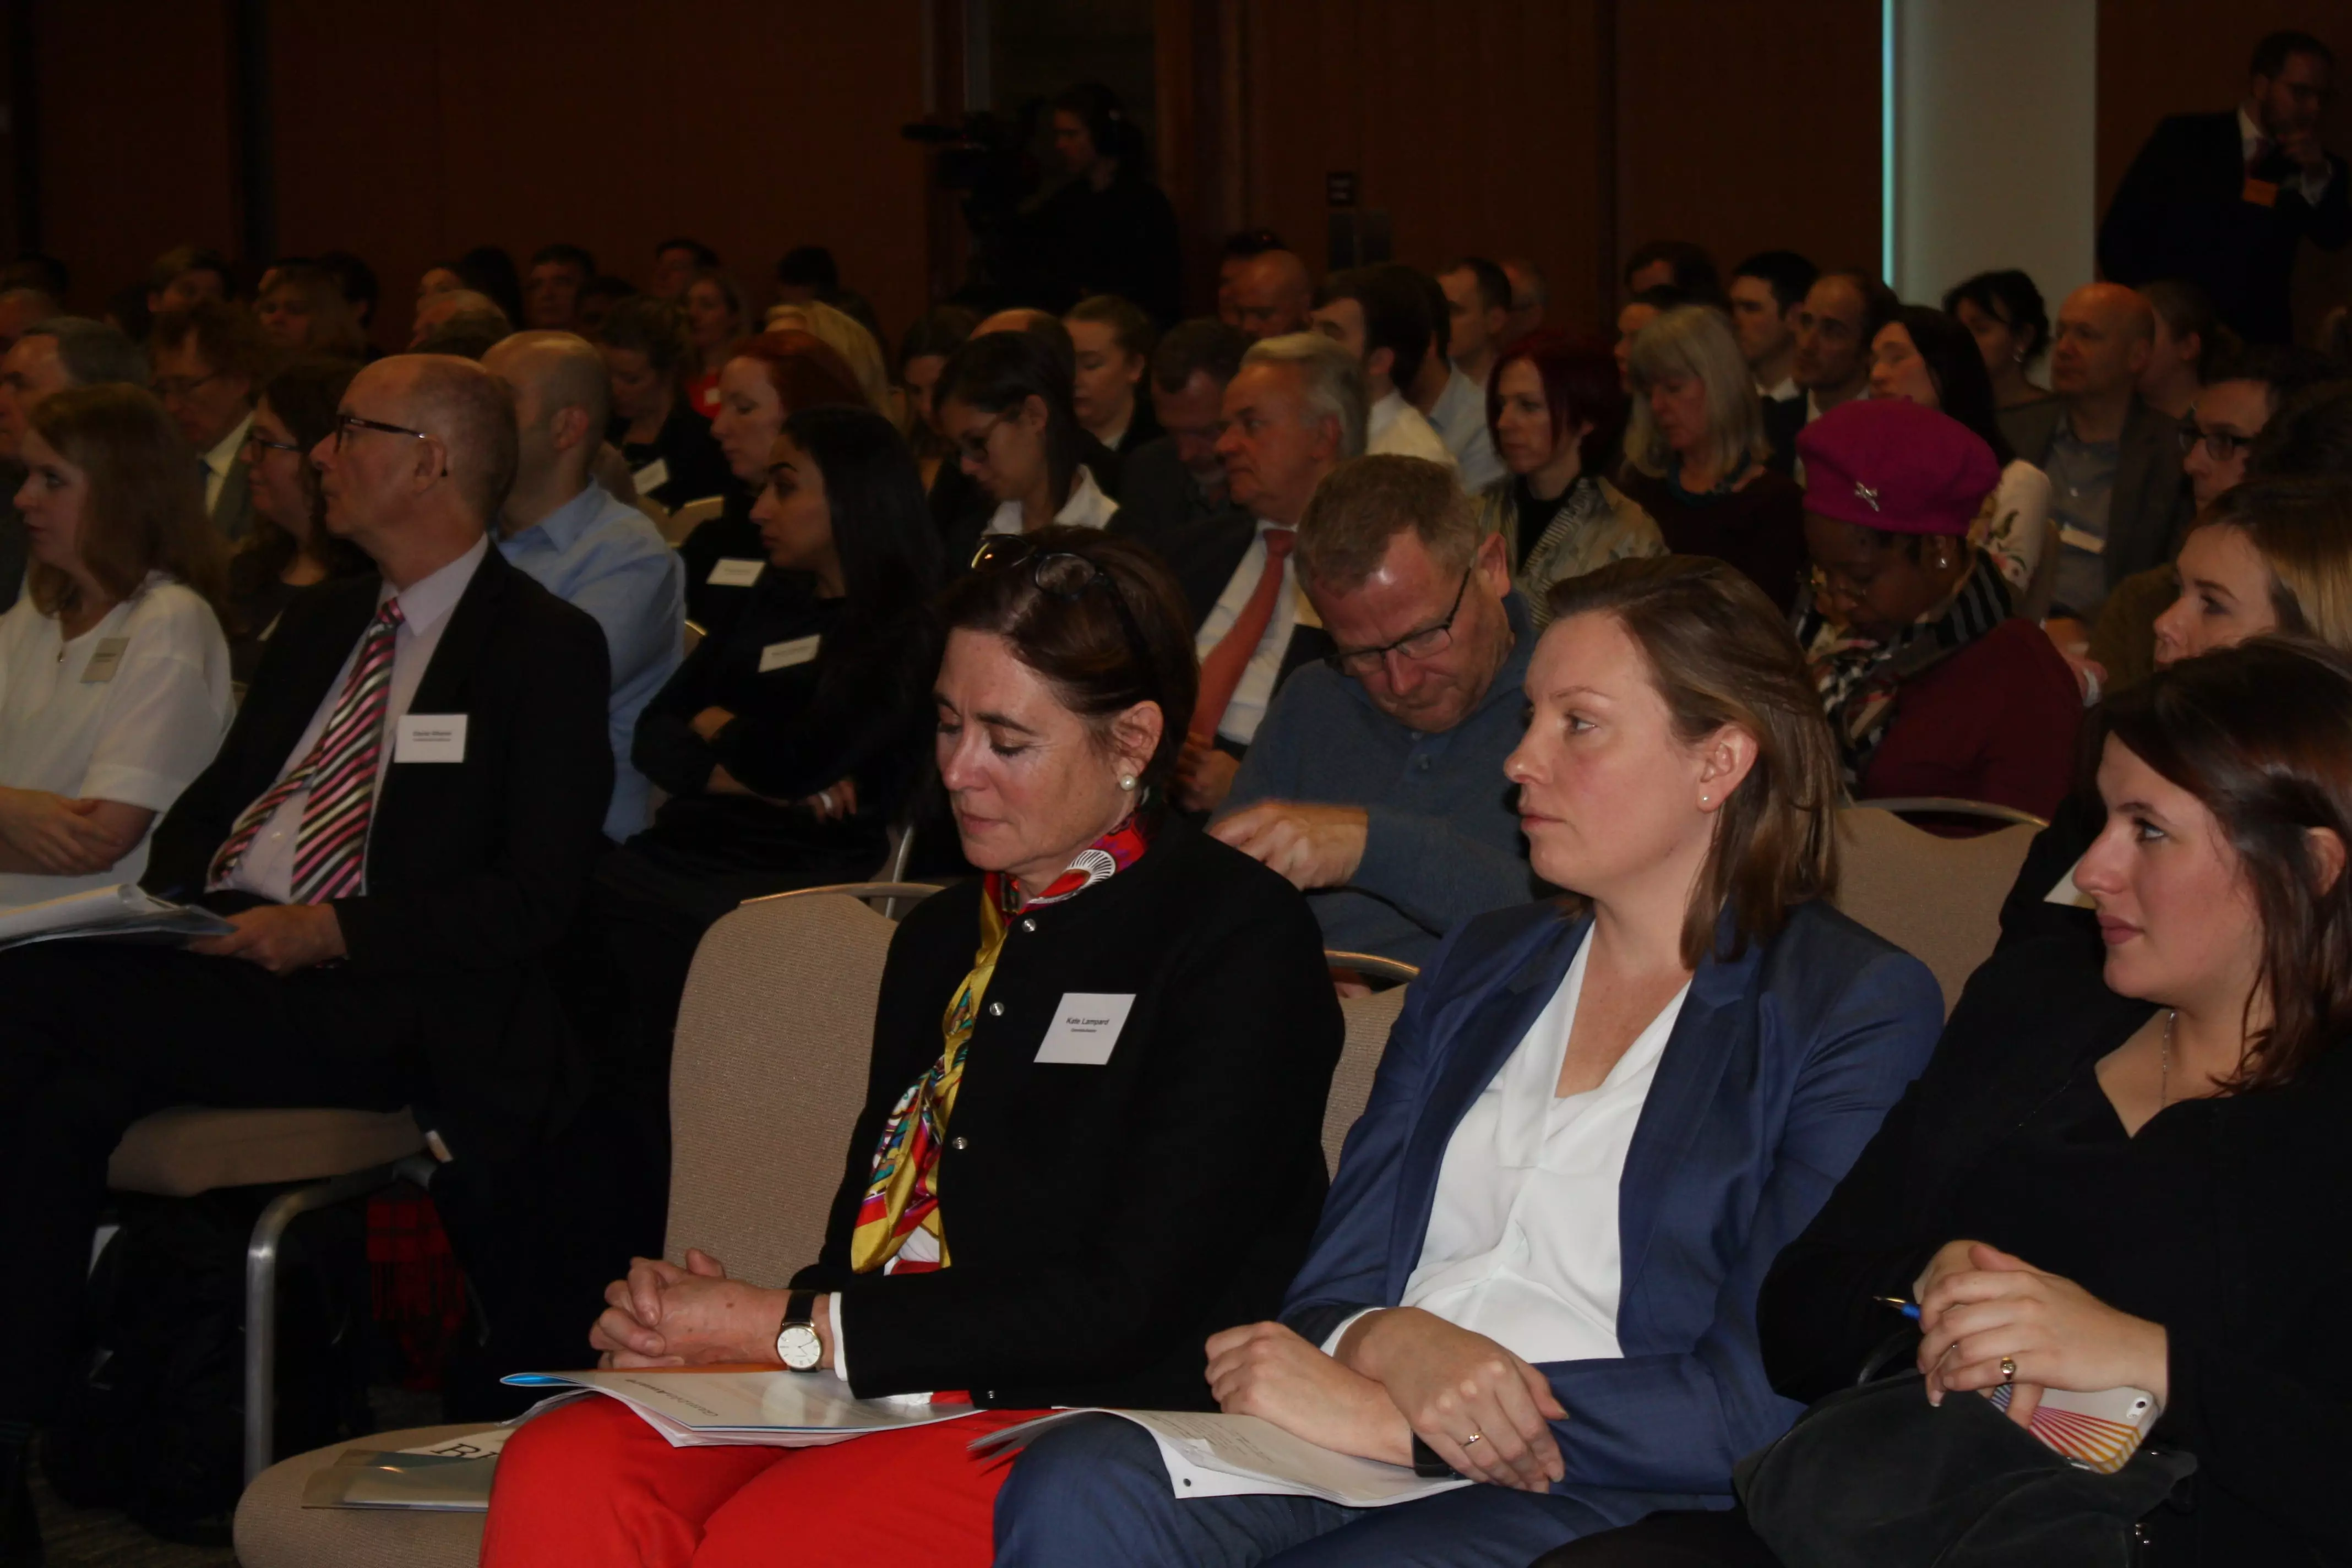 Attendees watching the opening of GambleAware's 5th Annual Harm Minimisation Conference